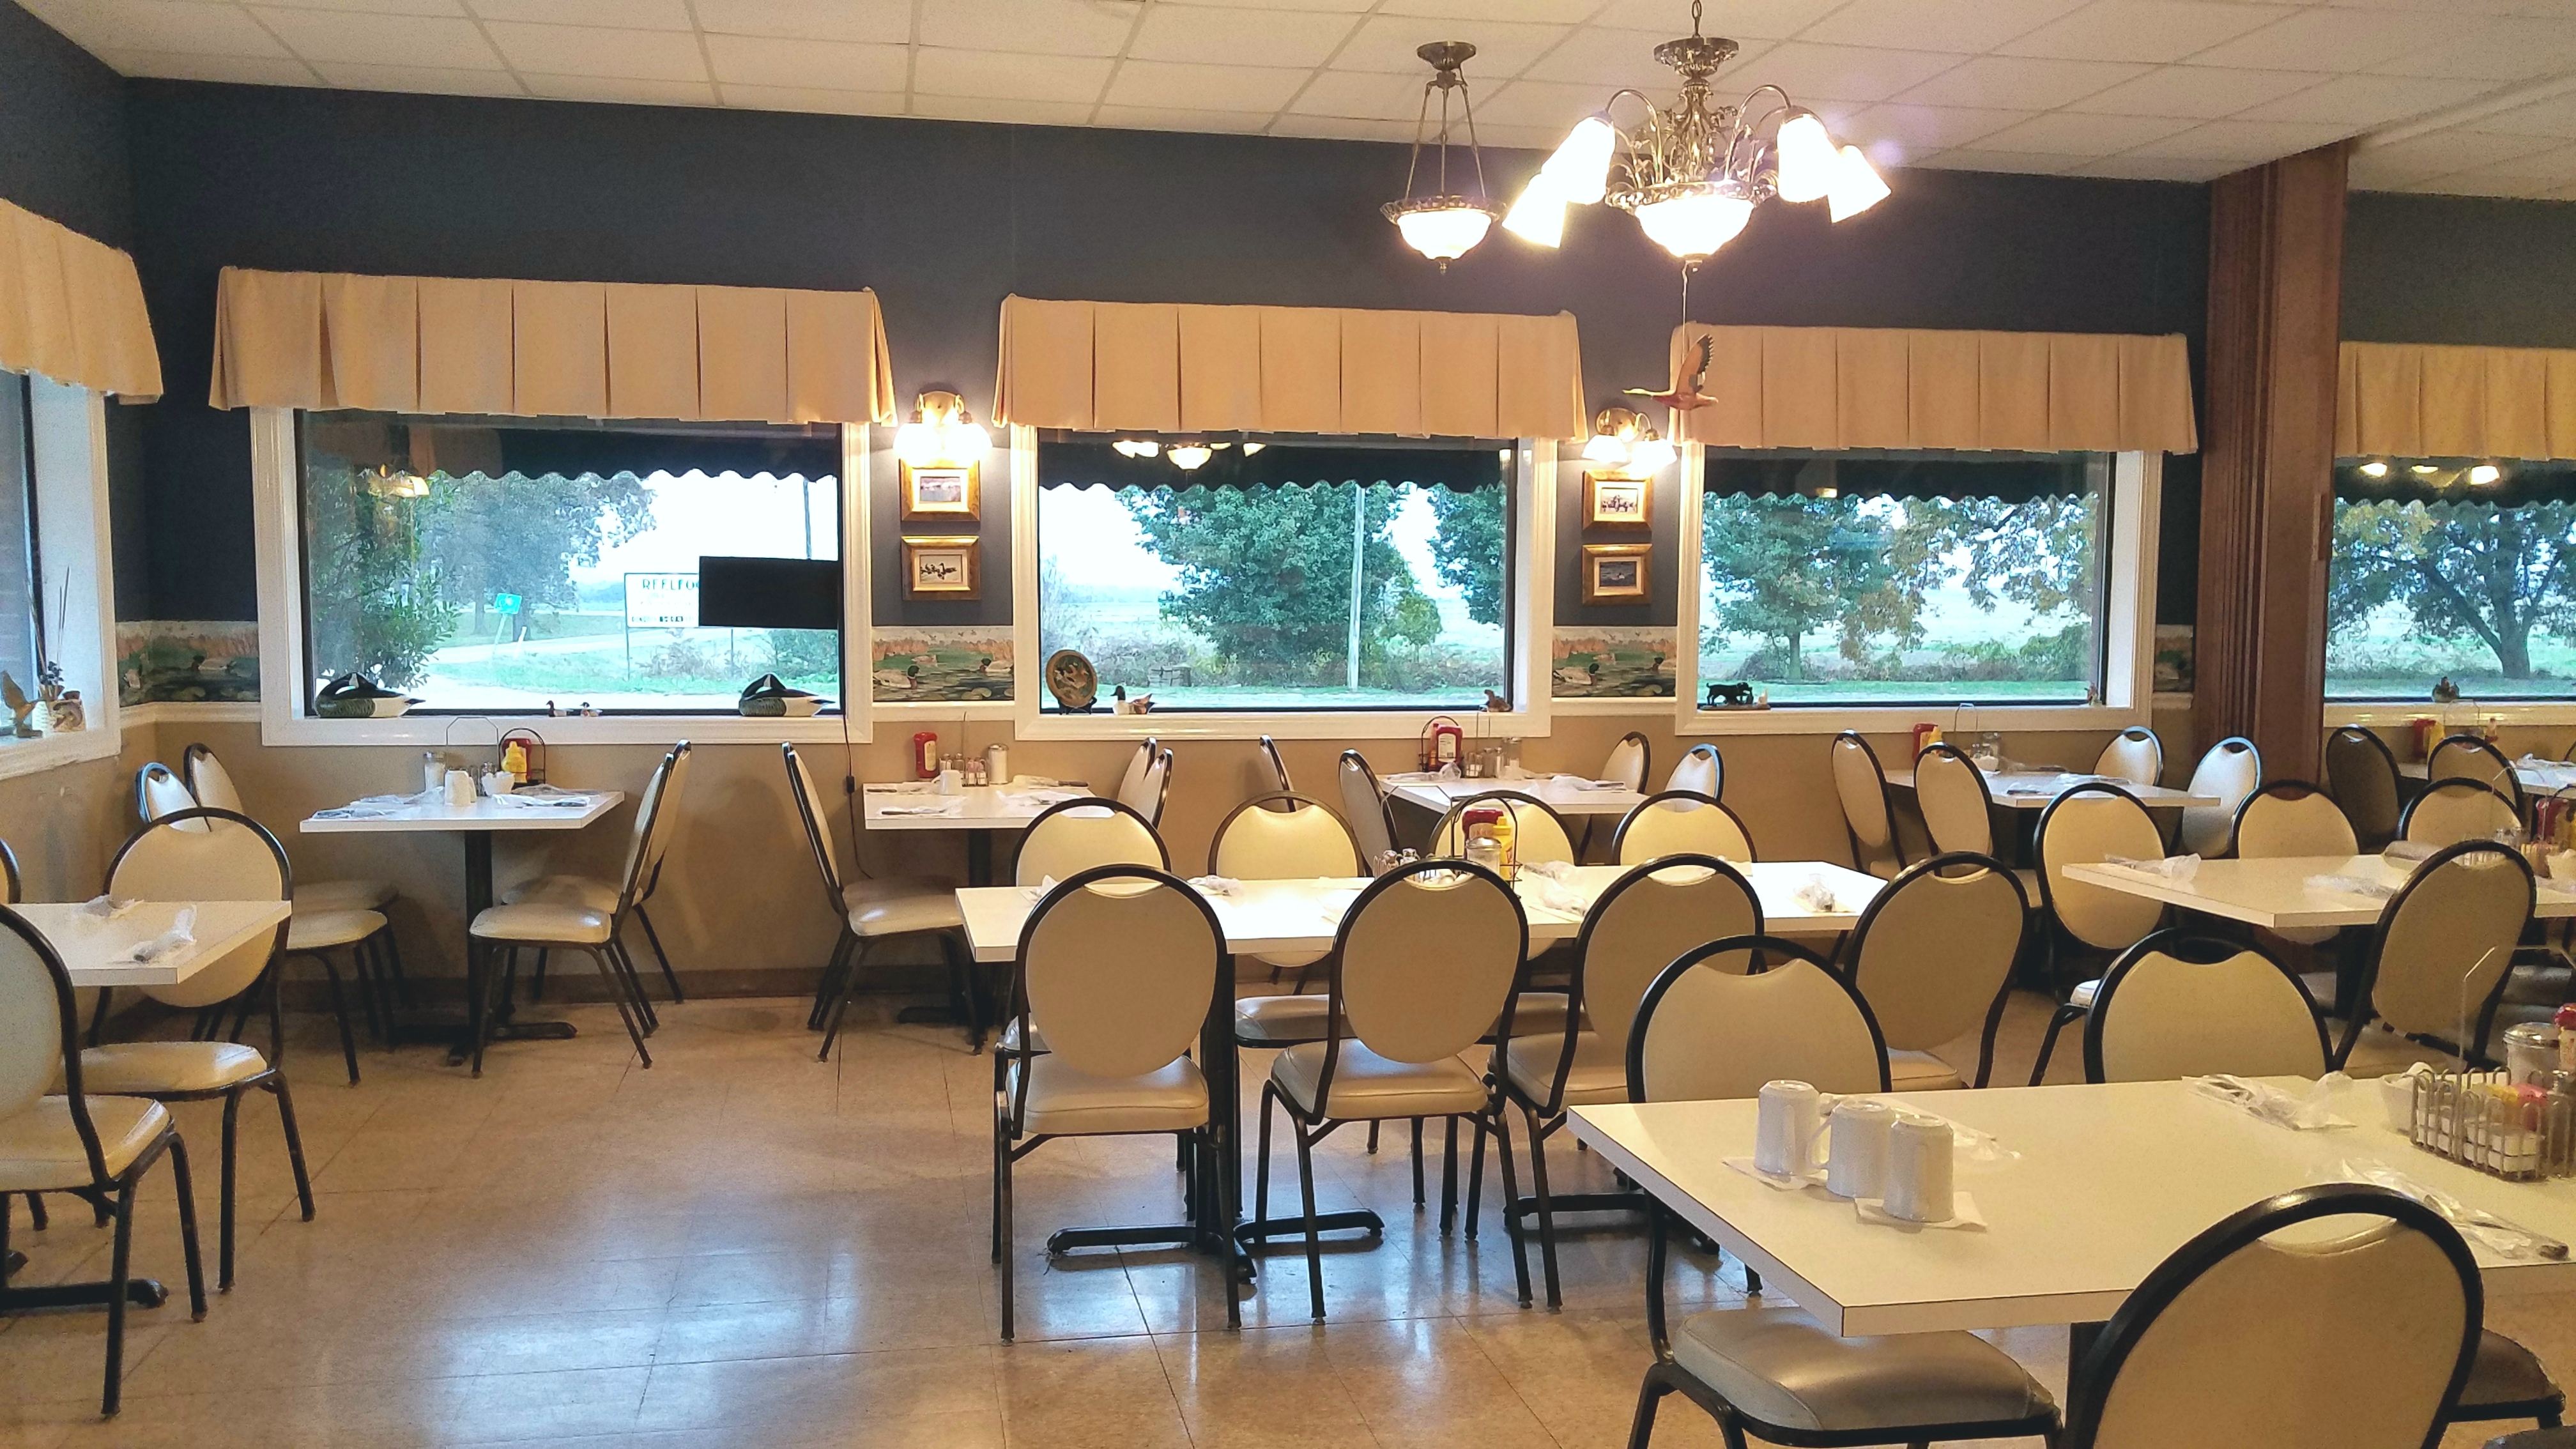 Lakeview Dining Room, on the shores of amazing Reelfoot Lake, is a well  established and successful restaurant business